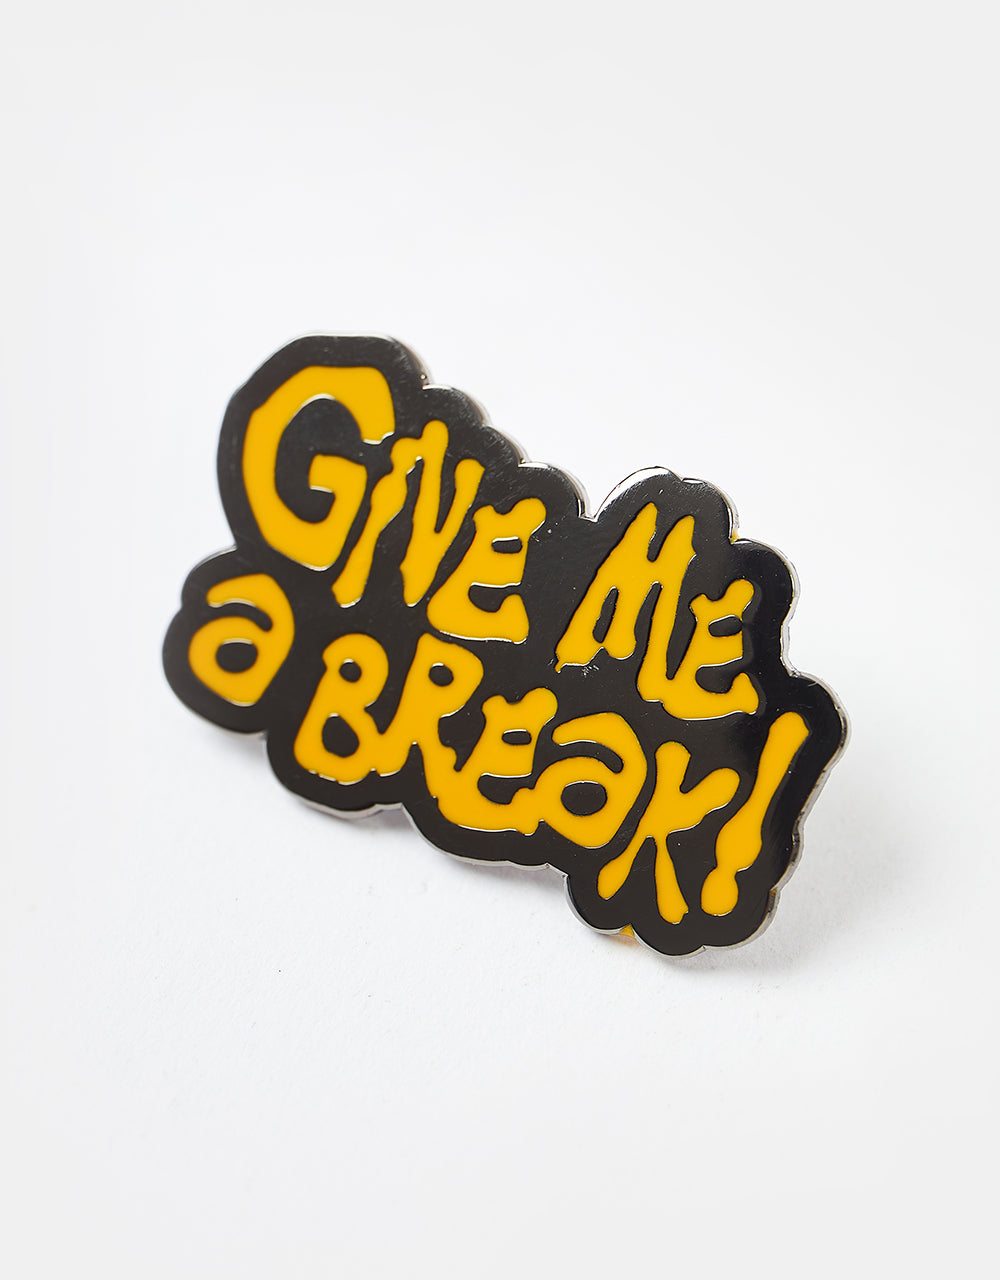 Route One Give Me A Break Pin - Nickel